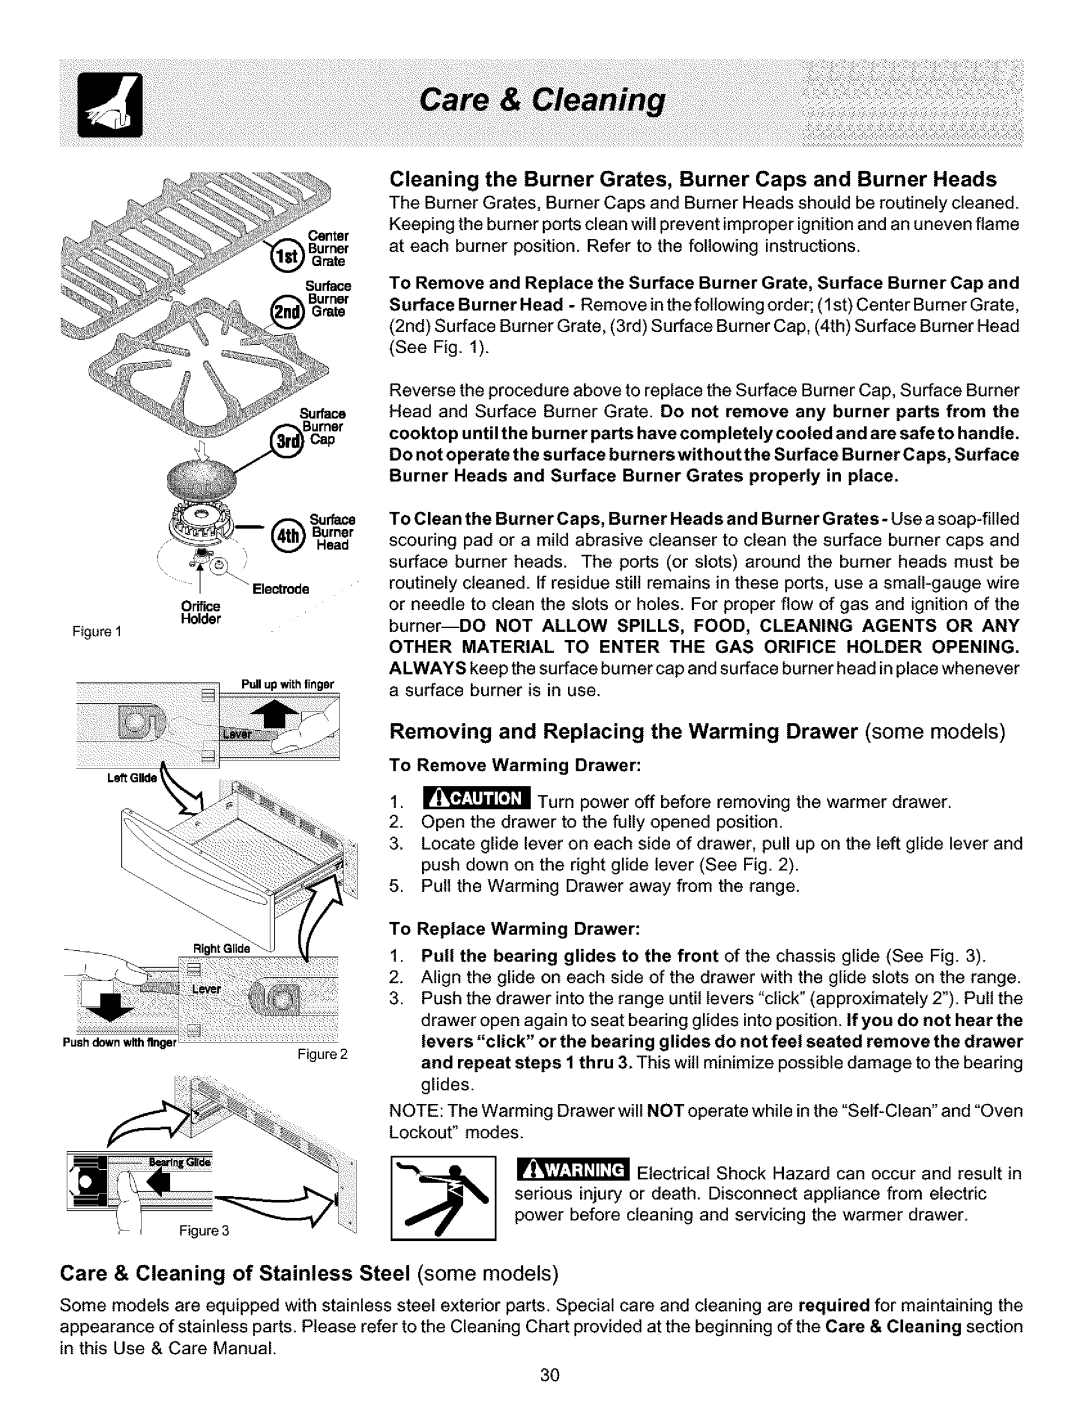 Frigidaire ES400 manual To Remove Warming Drawer 